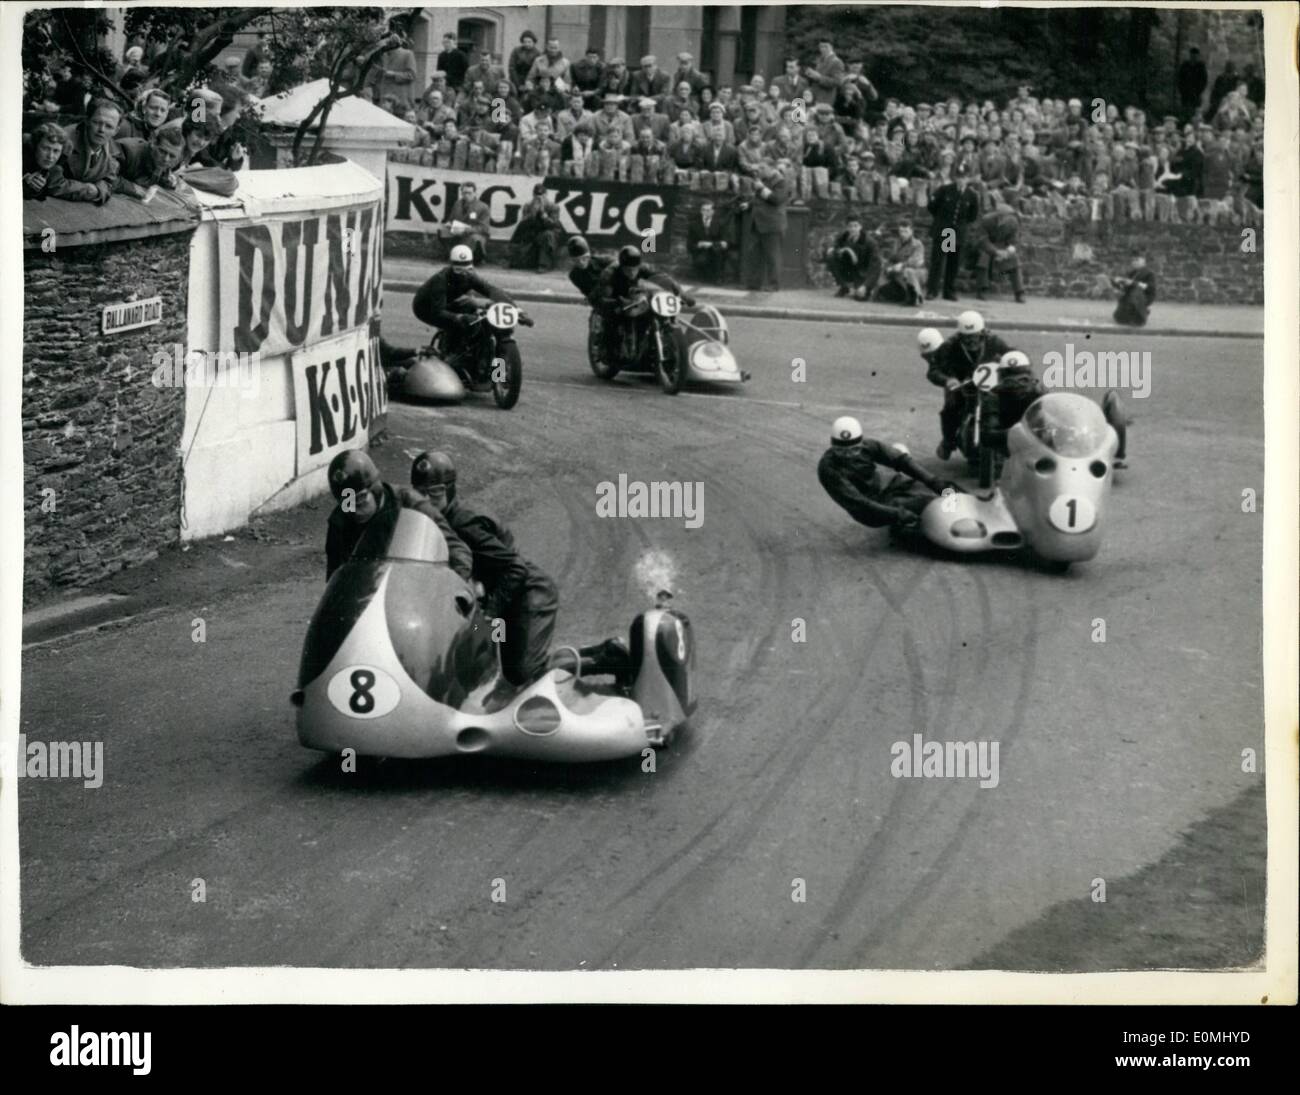 Jun. 06, 1955 - T.T. Races on the Isle of Man. Sidecar event: Photo shows general view showing competitors rounding Parkfield Corner start of the international sidecar event. during the T.T. on the Isle of Man. No.1 Wilhelm Noll of Germany. the world sidecar champion who was leading but who was crashed five miles from the finish. The event was won by Willi Schneider of Germany on a B.M.W. Stock Photo